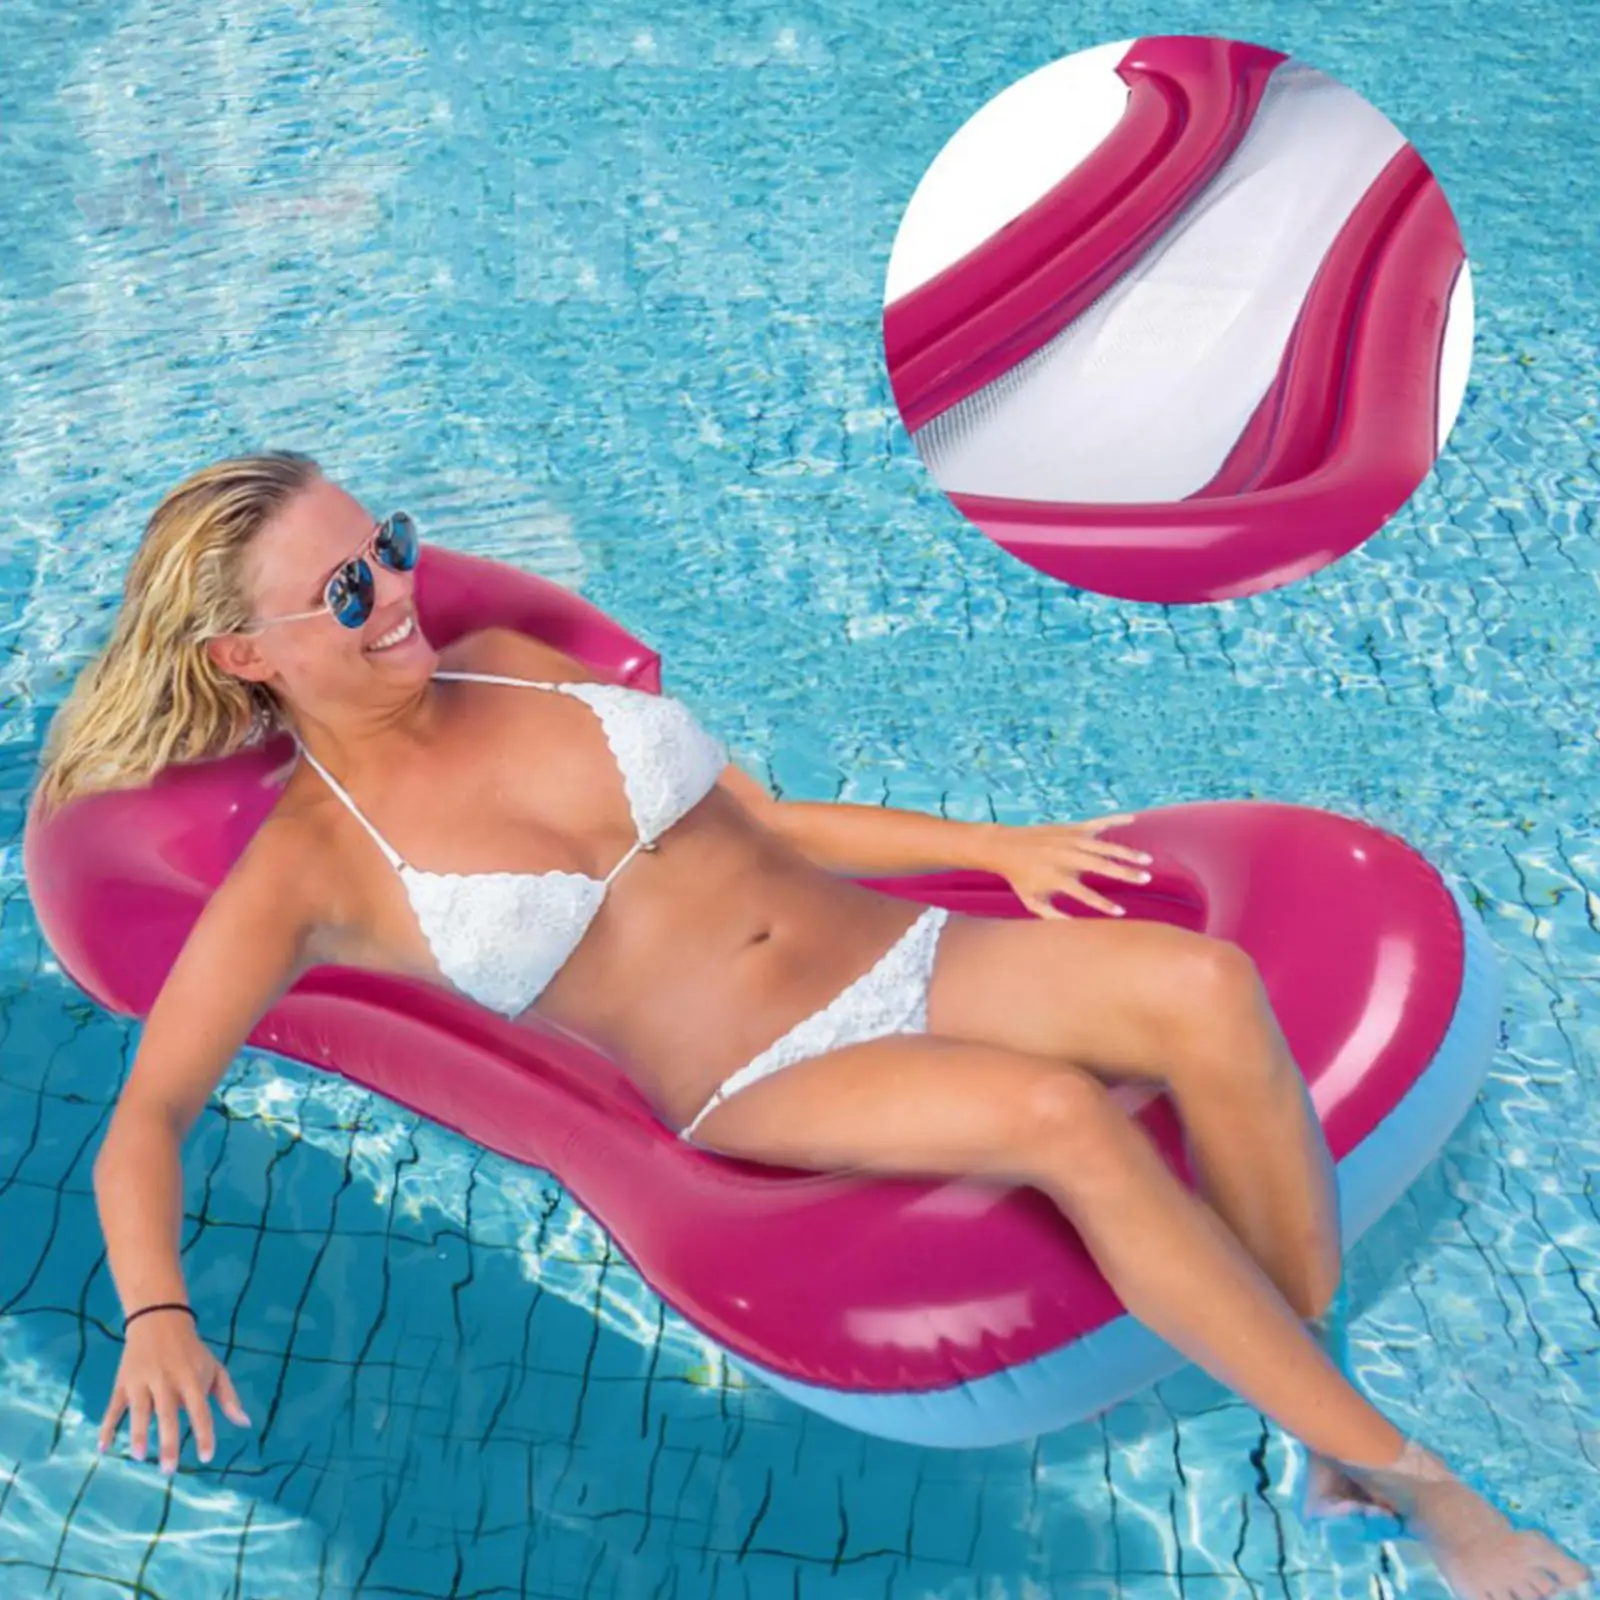 160x60cm Pool Inflatable Bed Pool Floating Mesh Lounger Float Chair